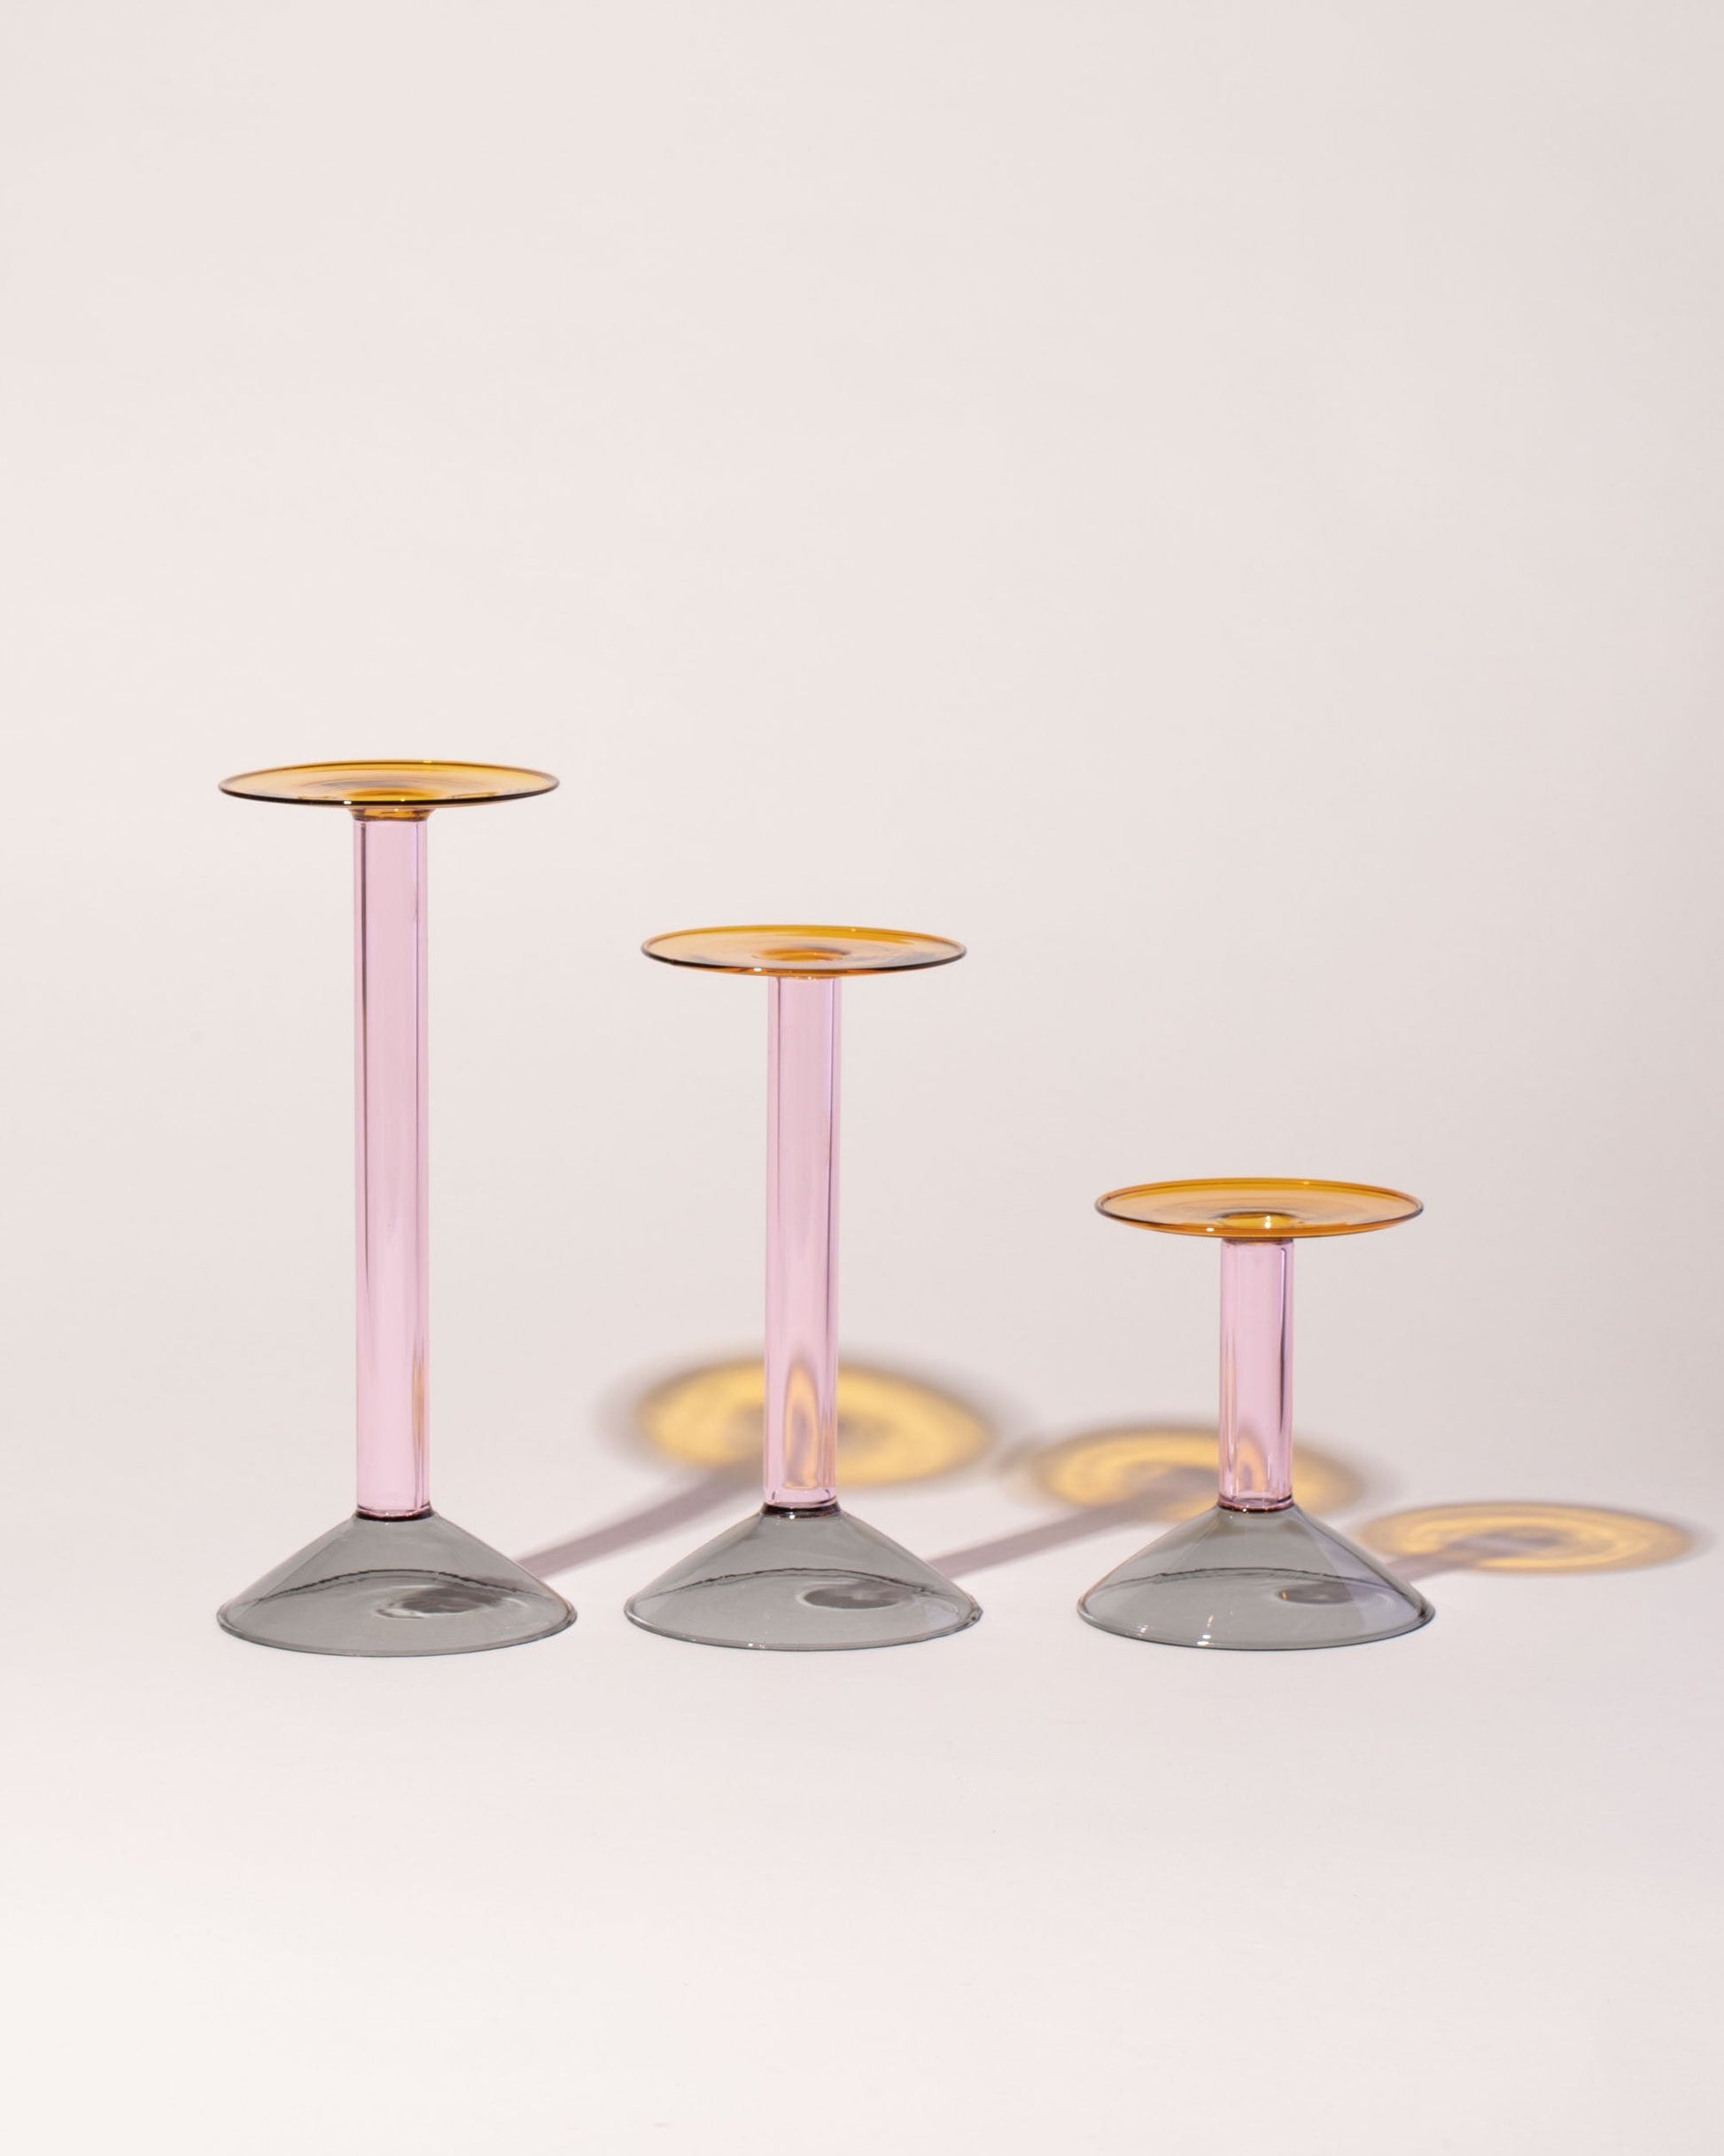 Group of Ichendorf Milano Small, Medium and Large Grey/Pink/Amber Rainbow Candleholders on light color background.